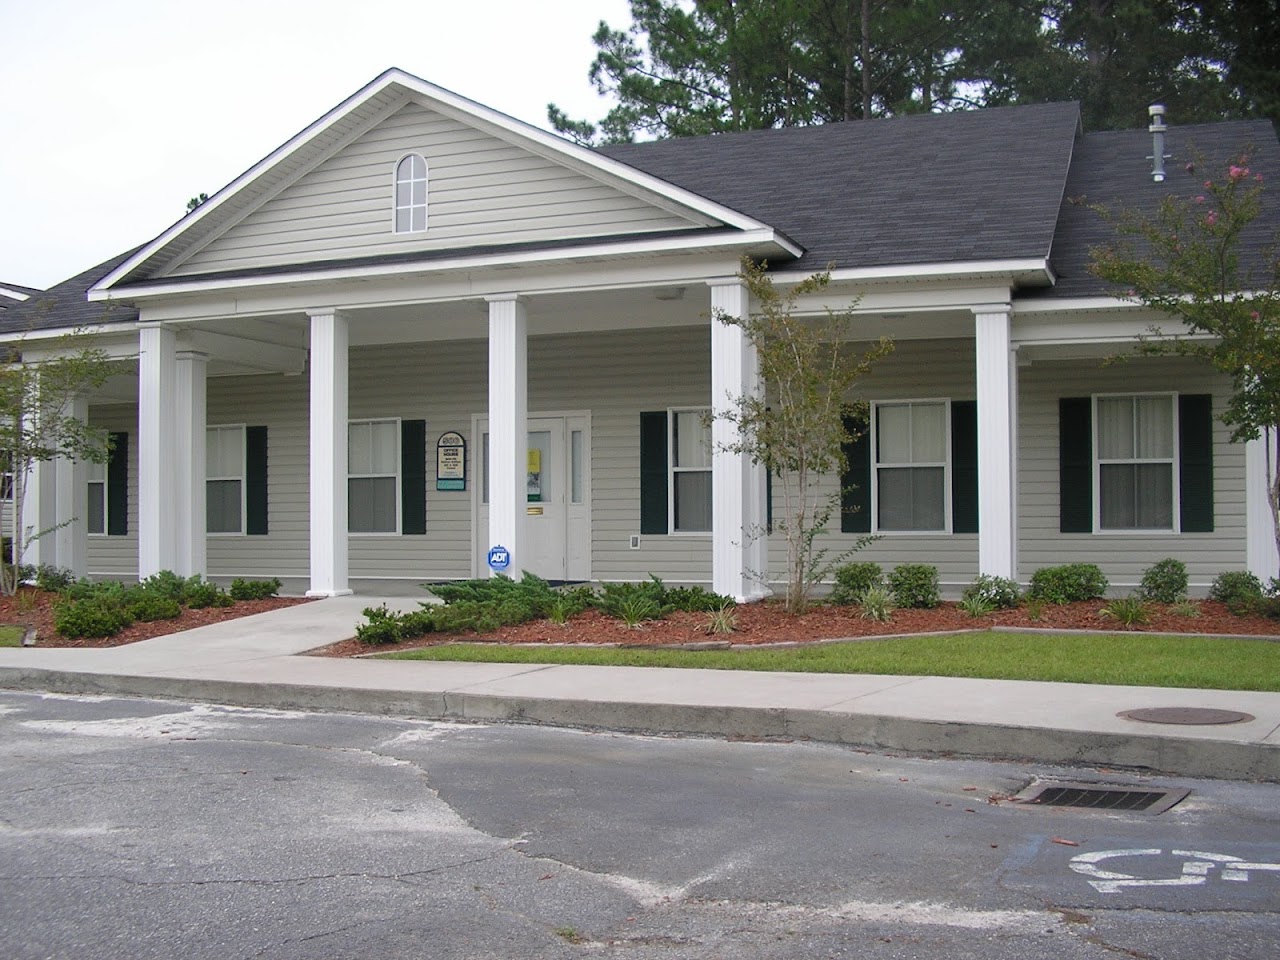 Photo of WARE MANOR. Affordable housing located at 500 WALNUT ST WAYCROSS, GA 31501